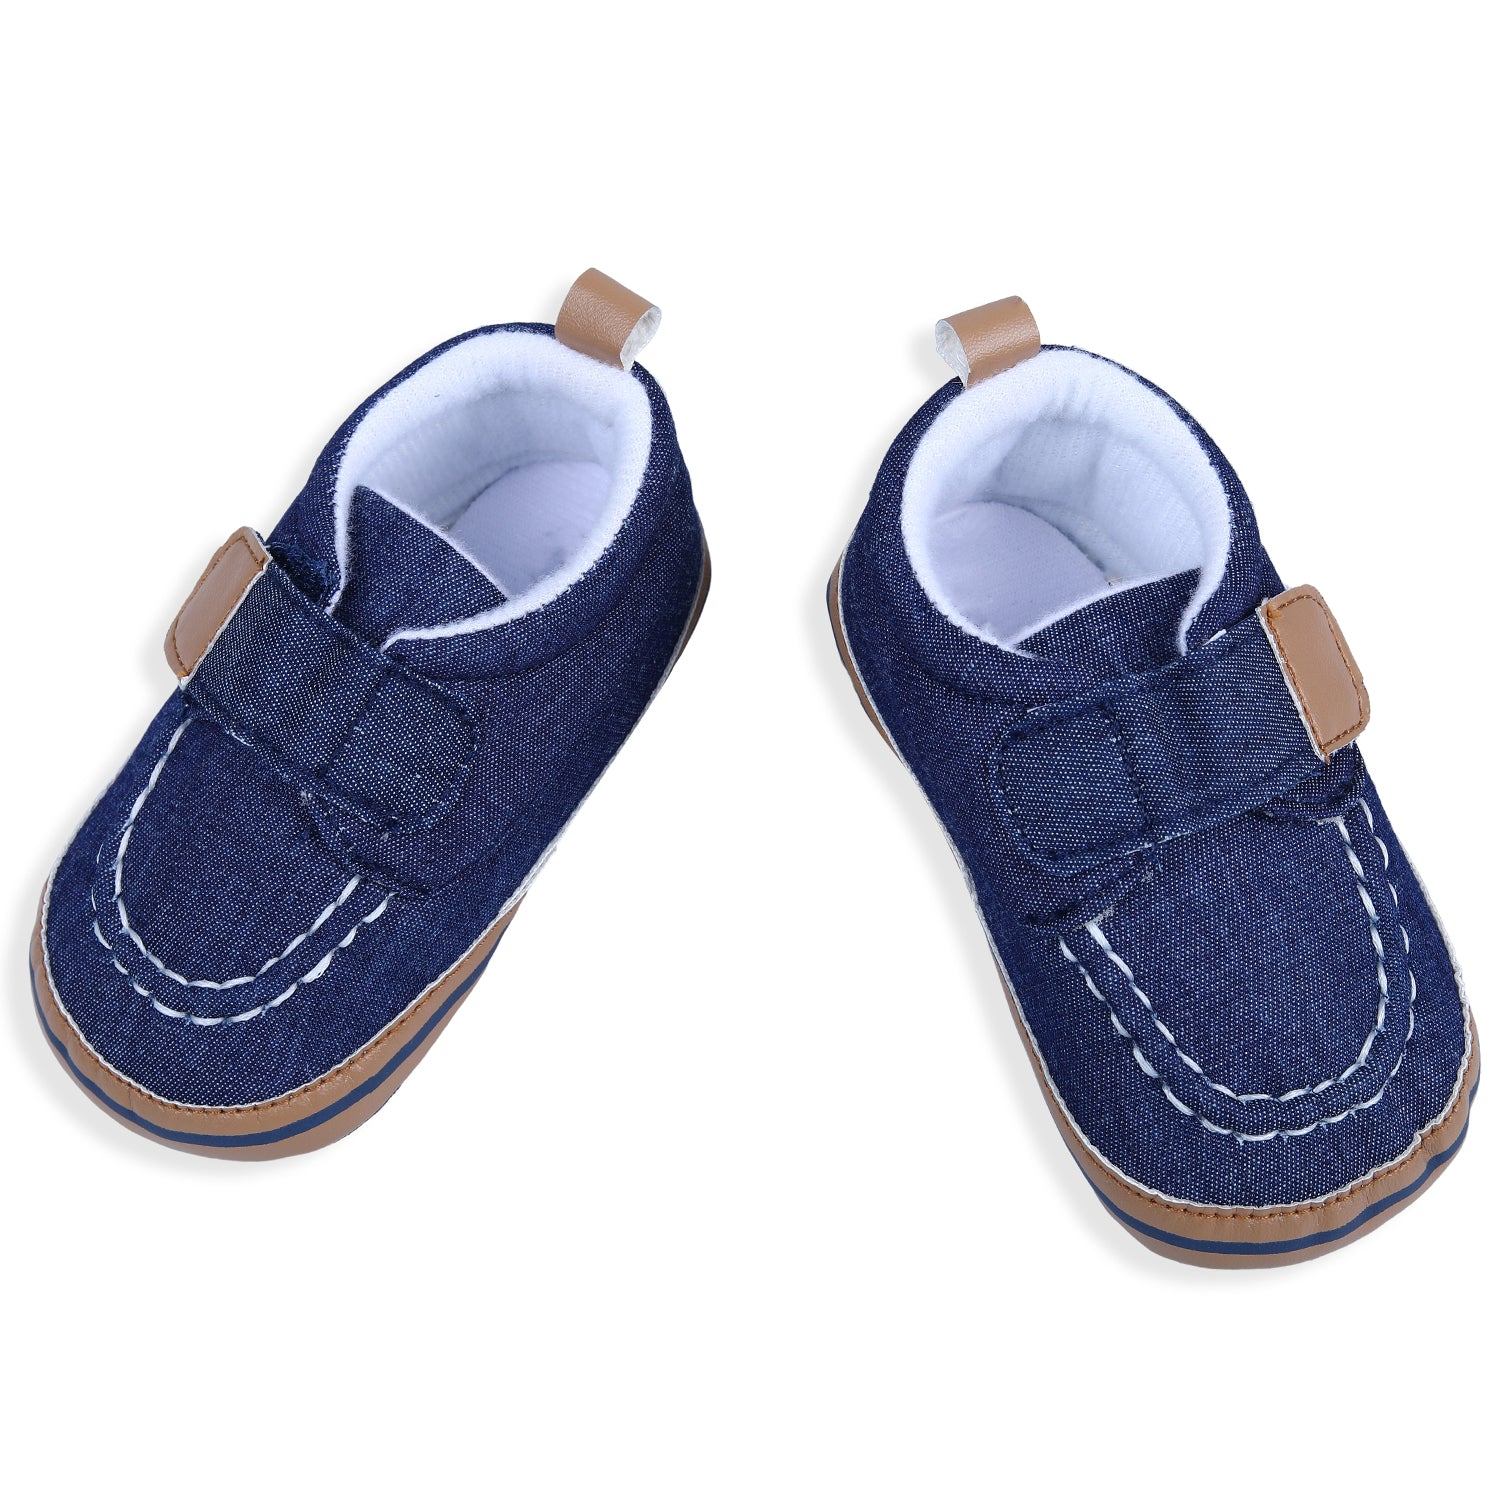 Solid Hookloop Stylish And Casual Denim Velcro Booties - Blue - Baby Moo